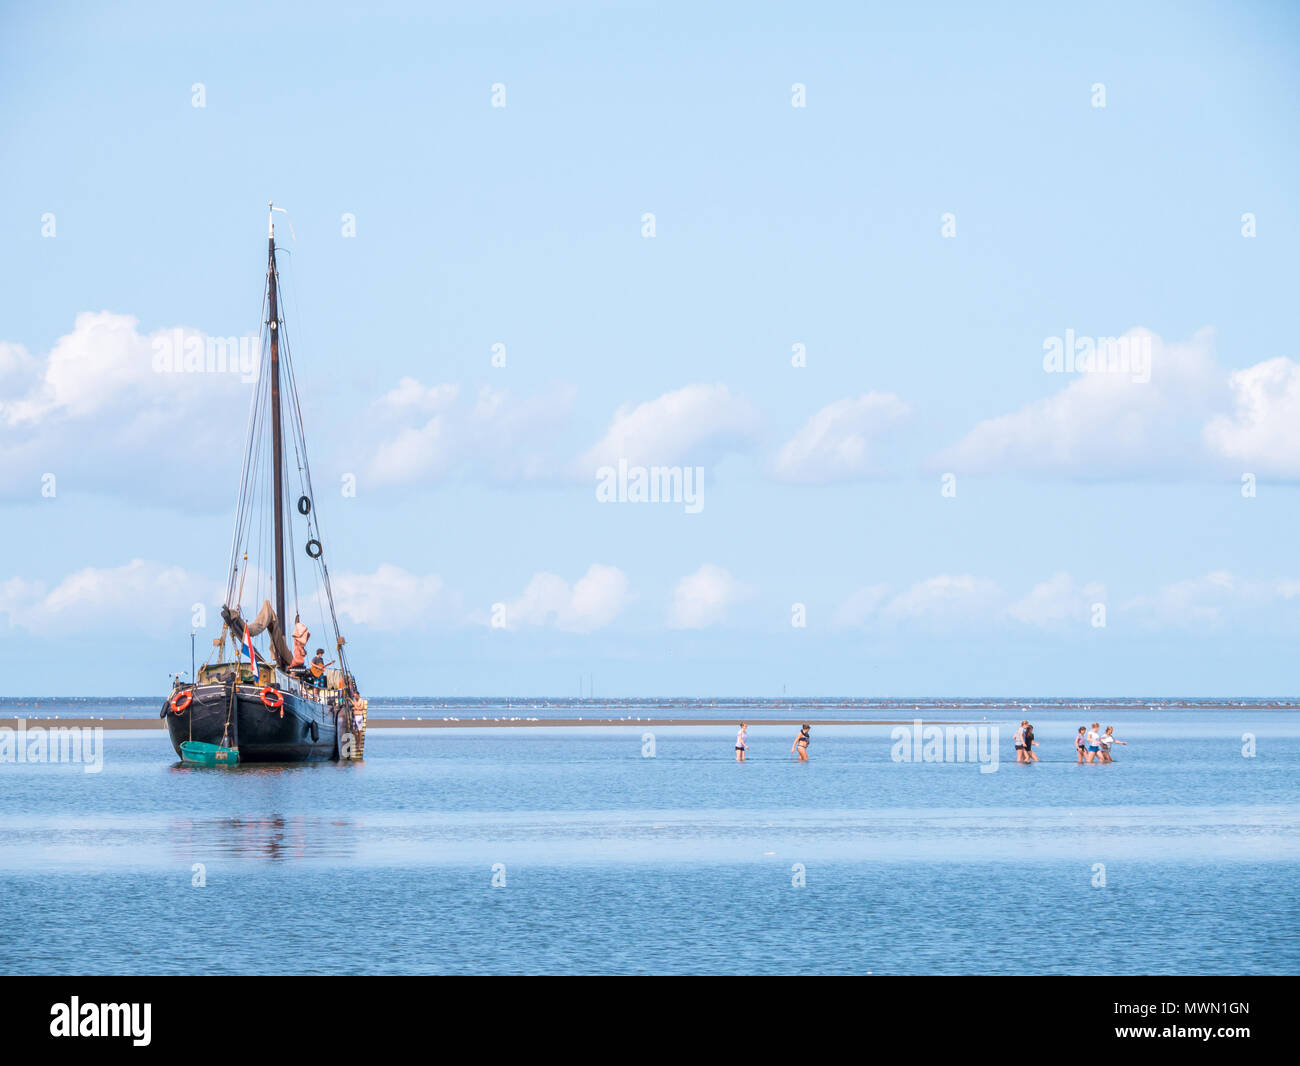 Group of youngsters wading in shallow water and sailing yacht aground at low tide on Wadden sea, Netherlands Stock Photo